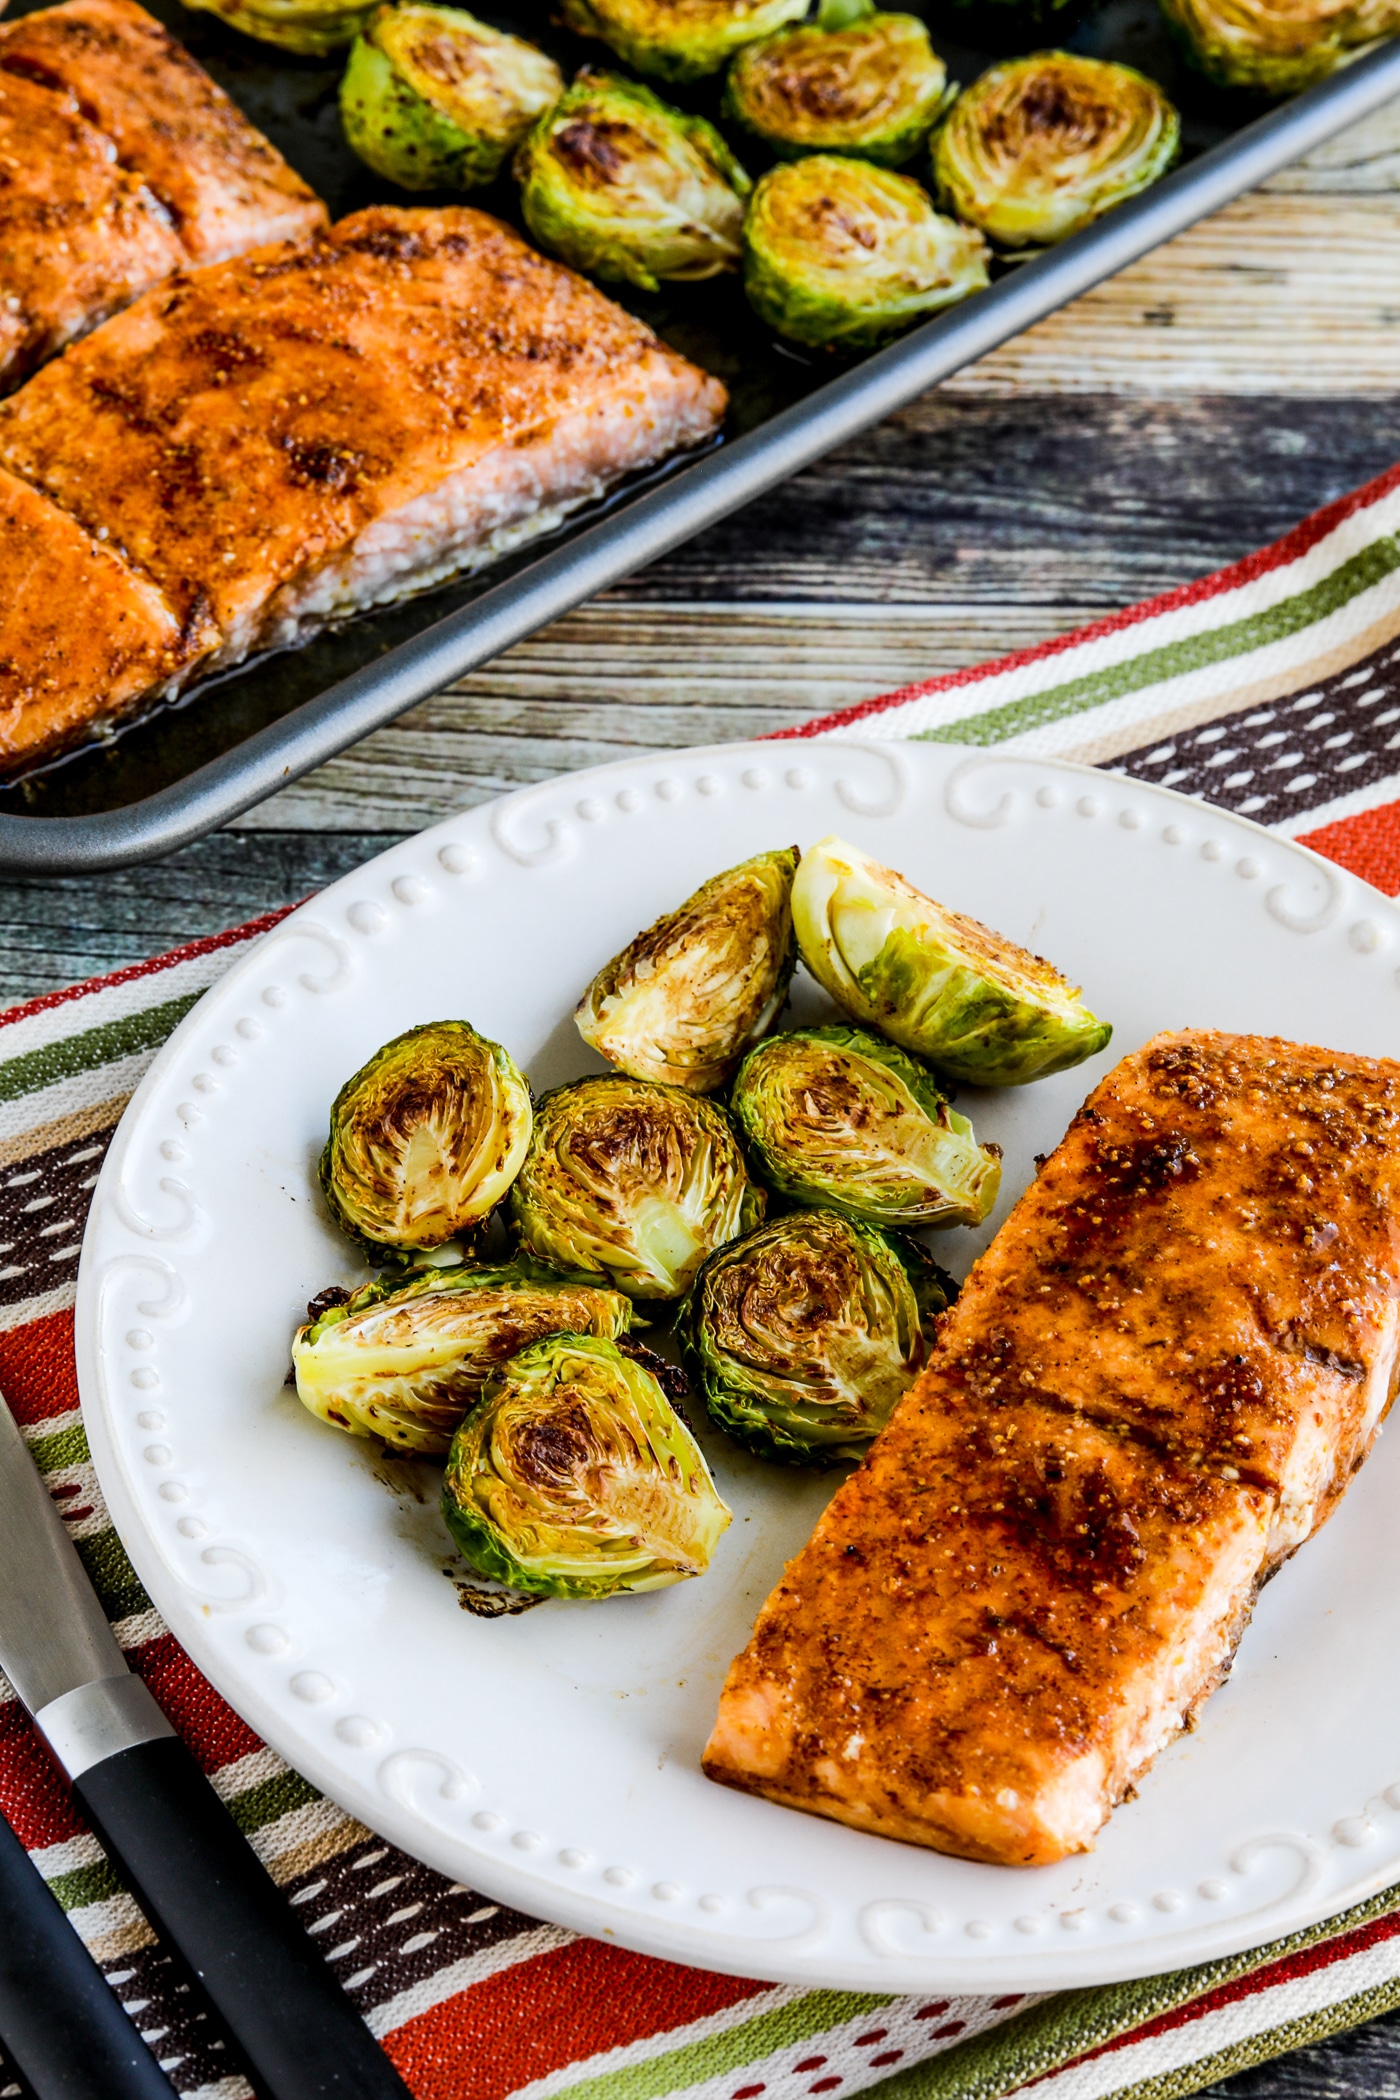 Salmon and Brussels Sprouts Sheet Pan Meal finished meal with one serving on plate